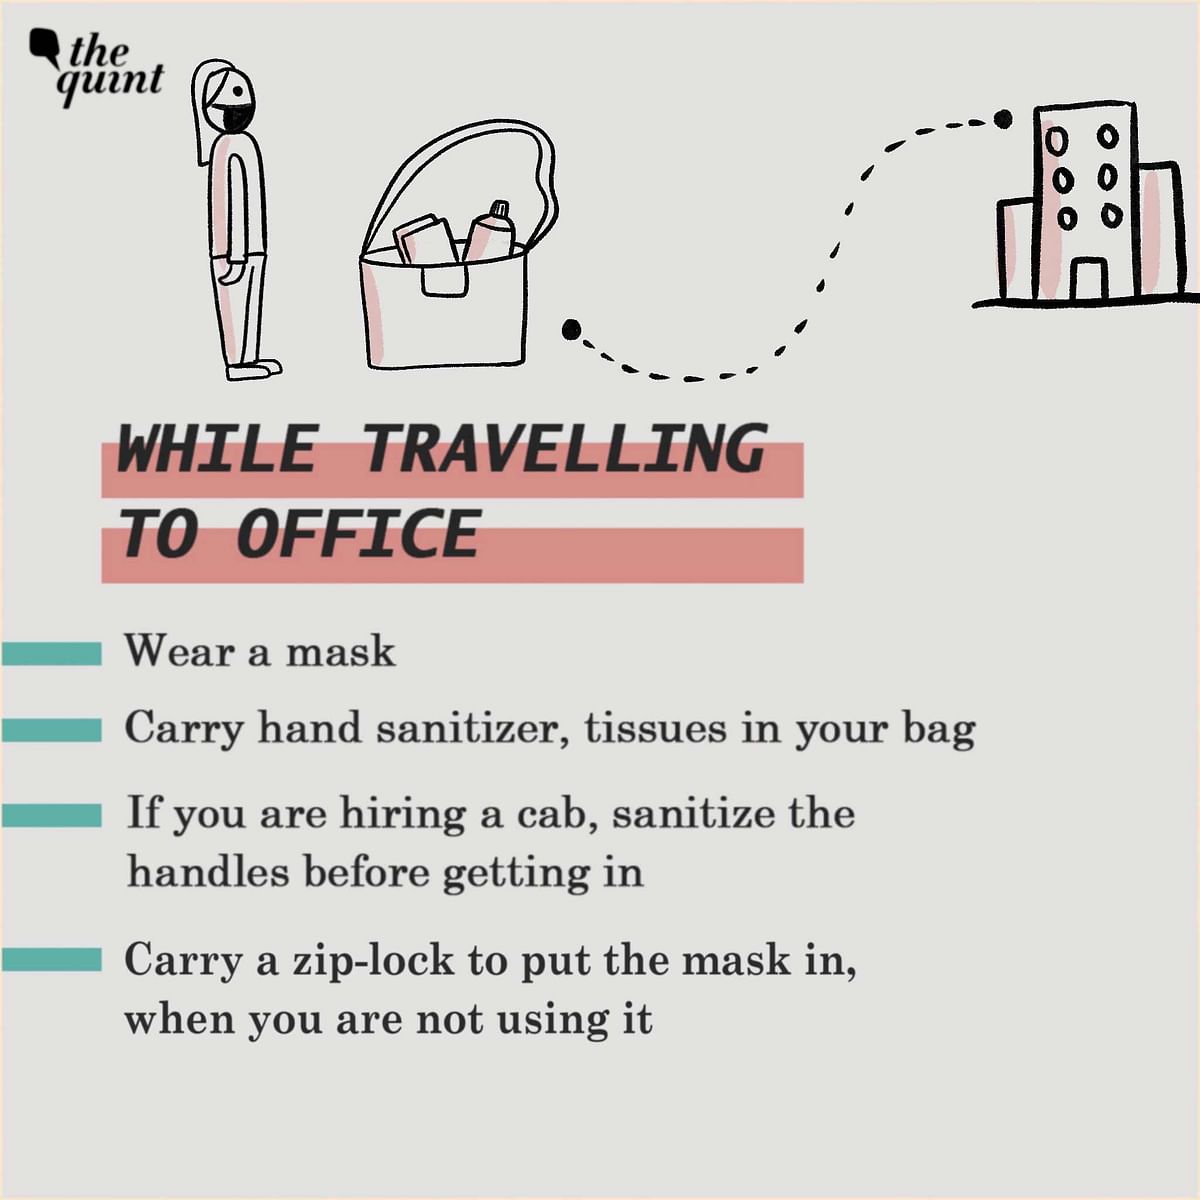 Here’s all you need to know about working from office during the coronavirus pandemic.